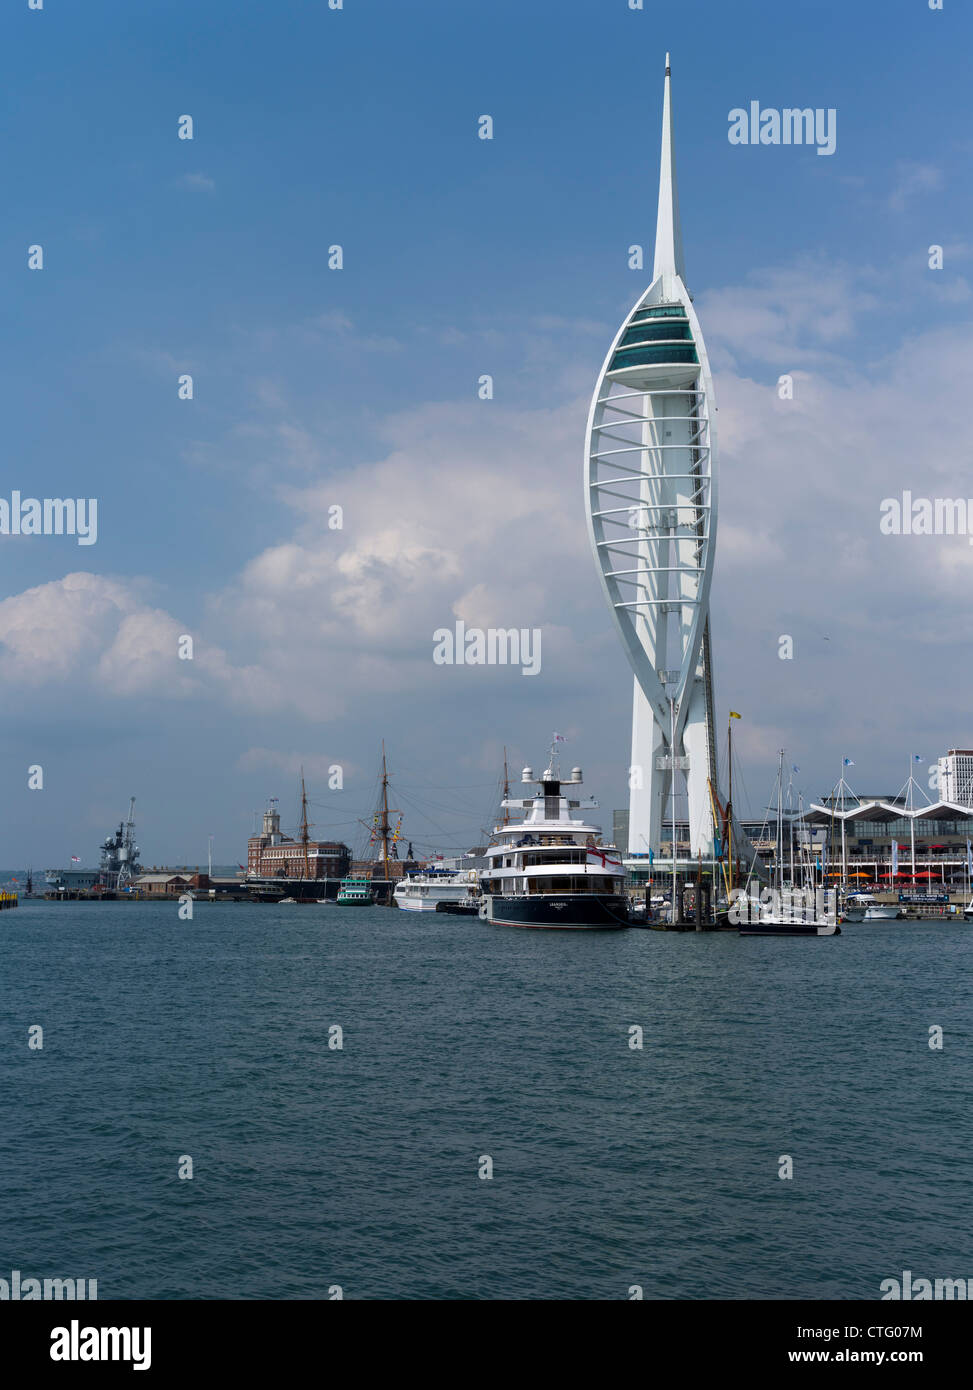 dh Portsmouth harbour PORTSMOUTH HAMPSHIRE Millennium Spinnaker Tower Gunwharf Quays Ufer Boote Stockfoto